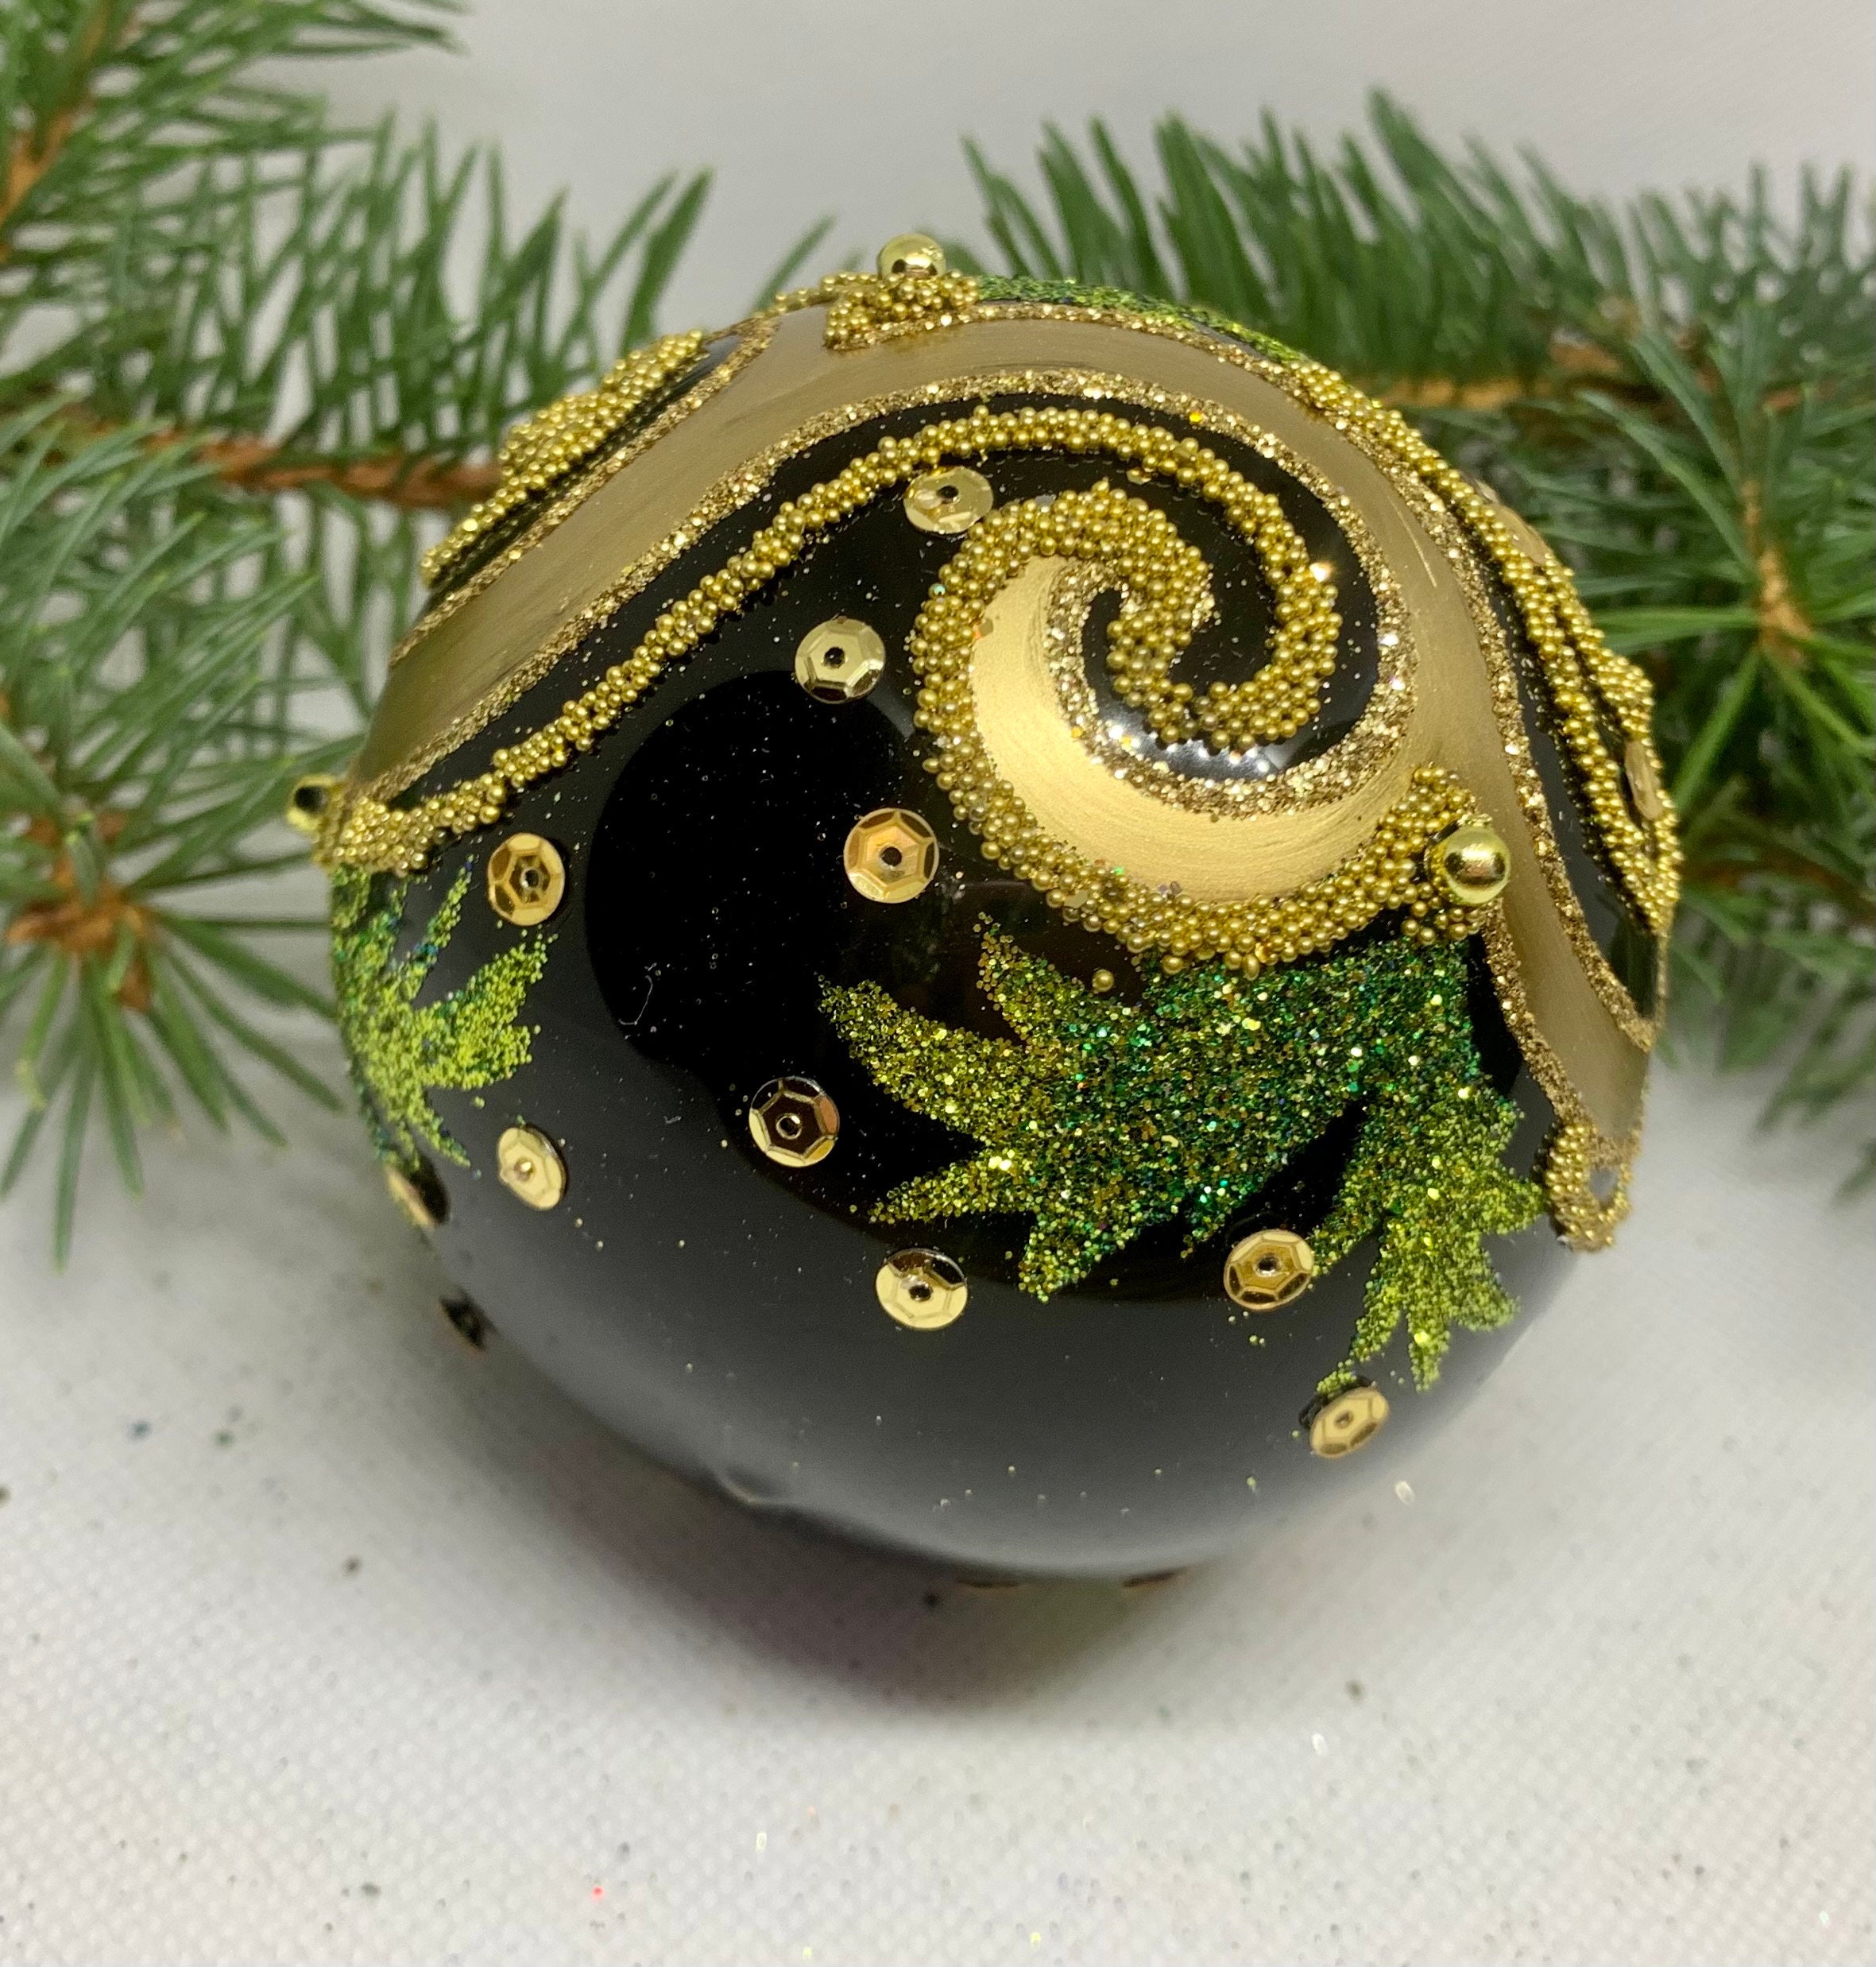 Black Christmas ball ornaments with crystalls with ribbons on w Stock Photo  by ©goldspice0708 7825994